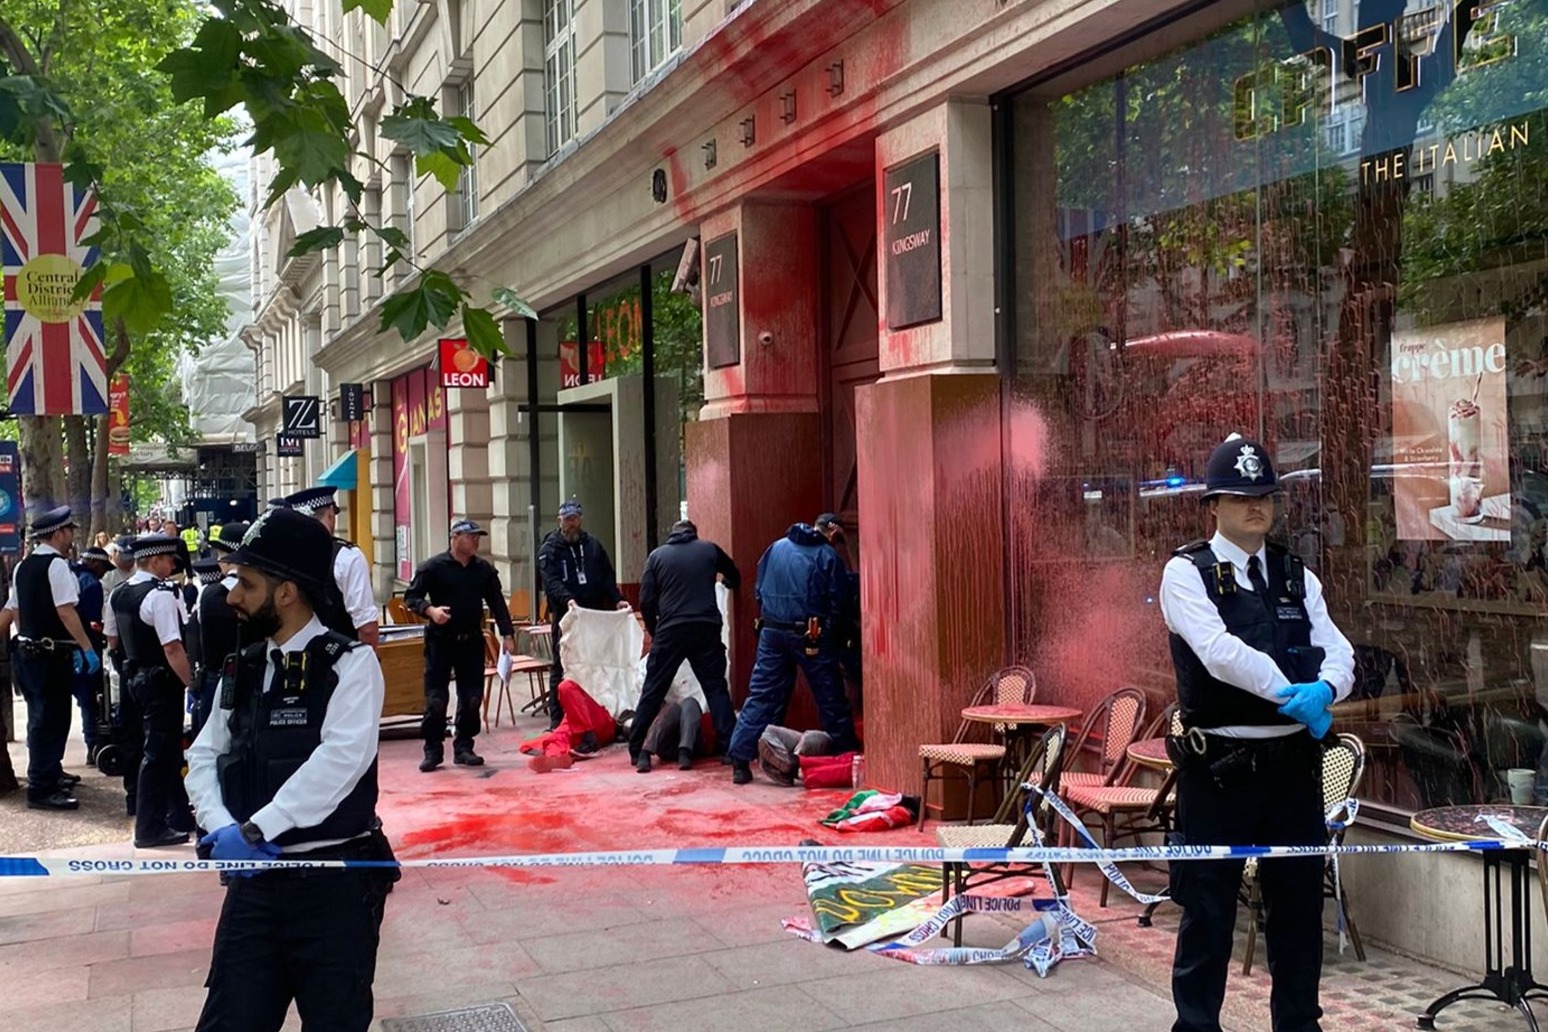 Four Palestine protesters arrested after covering London building in paint 